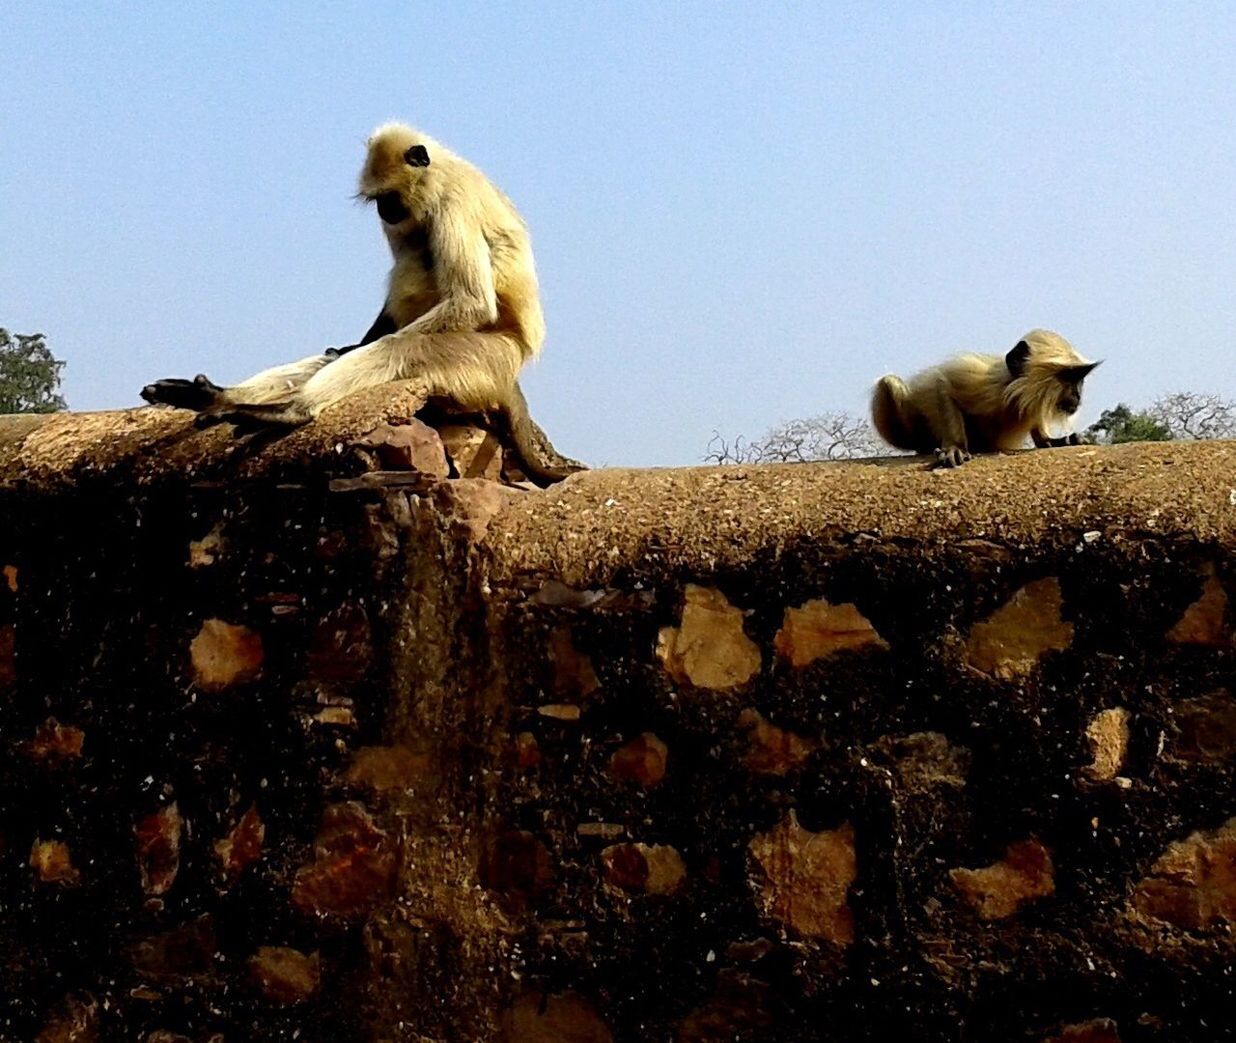 Female monkey with baby sitting on wall